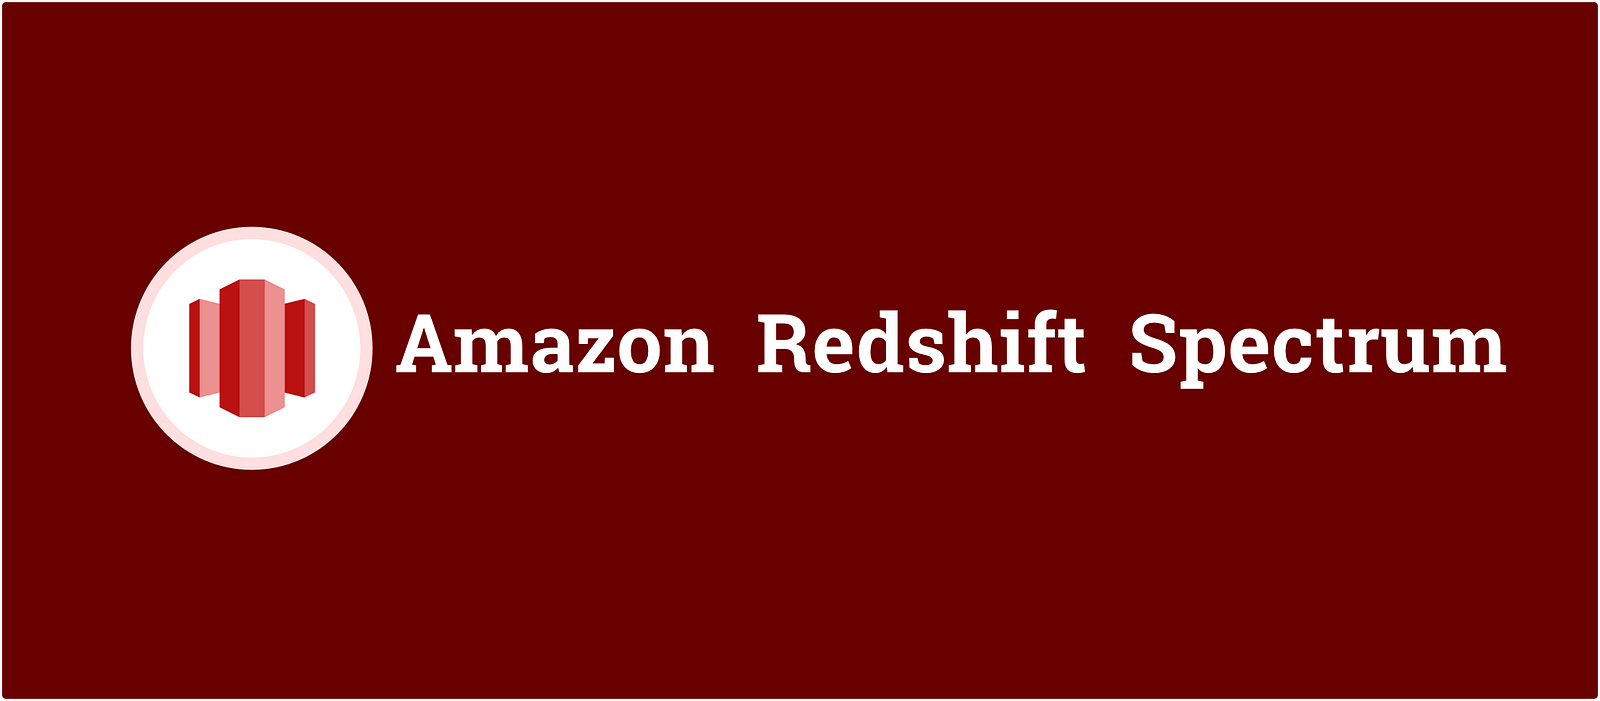 Amazon Redshift Spectrum 10 Simple Tips That Help You Quickly Find Success